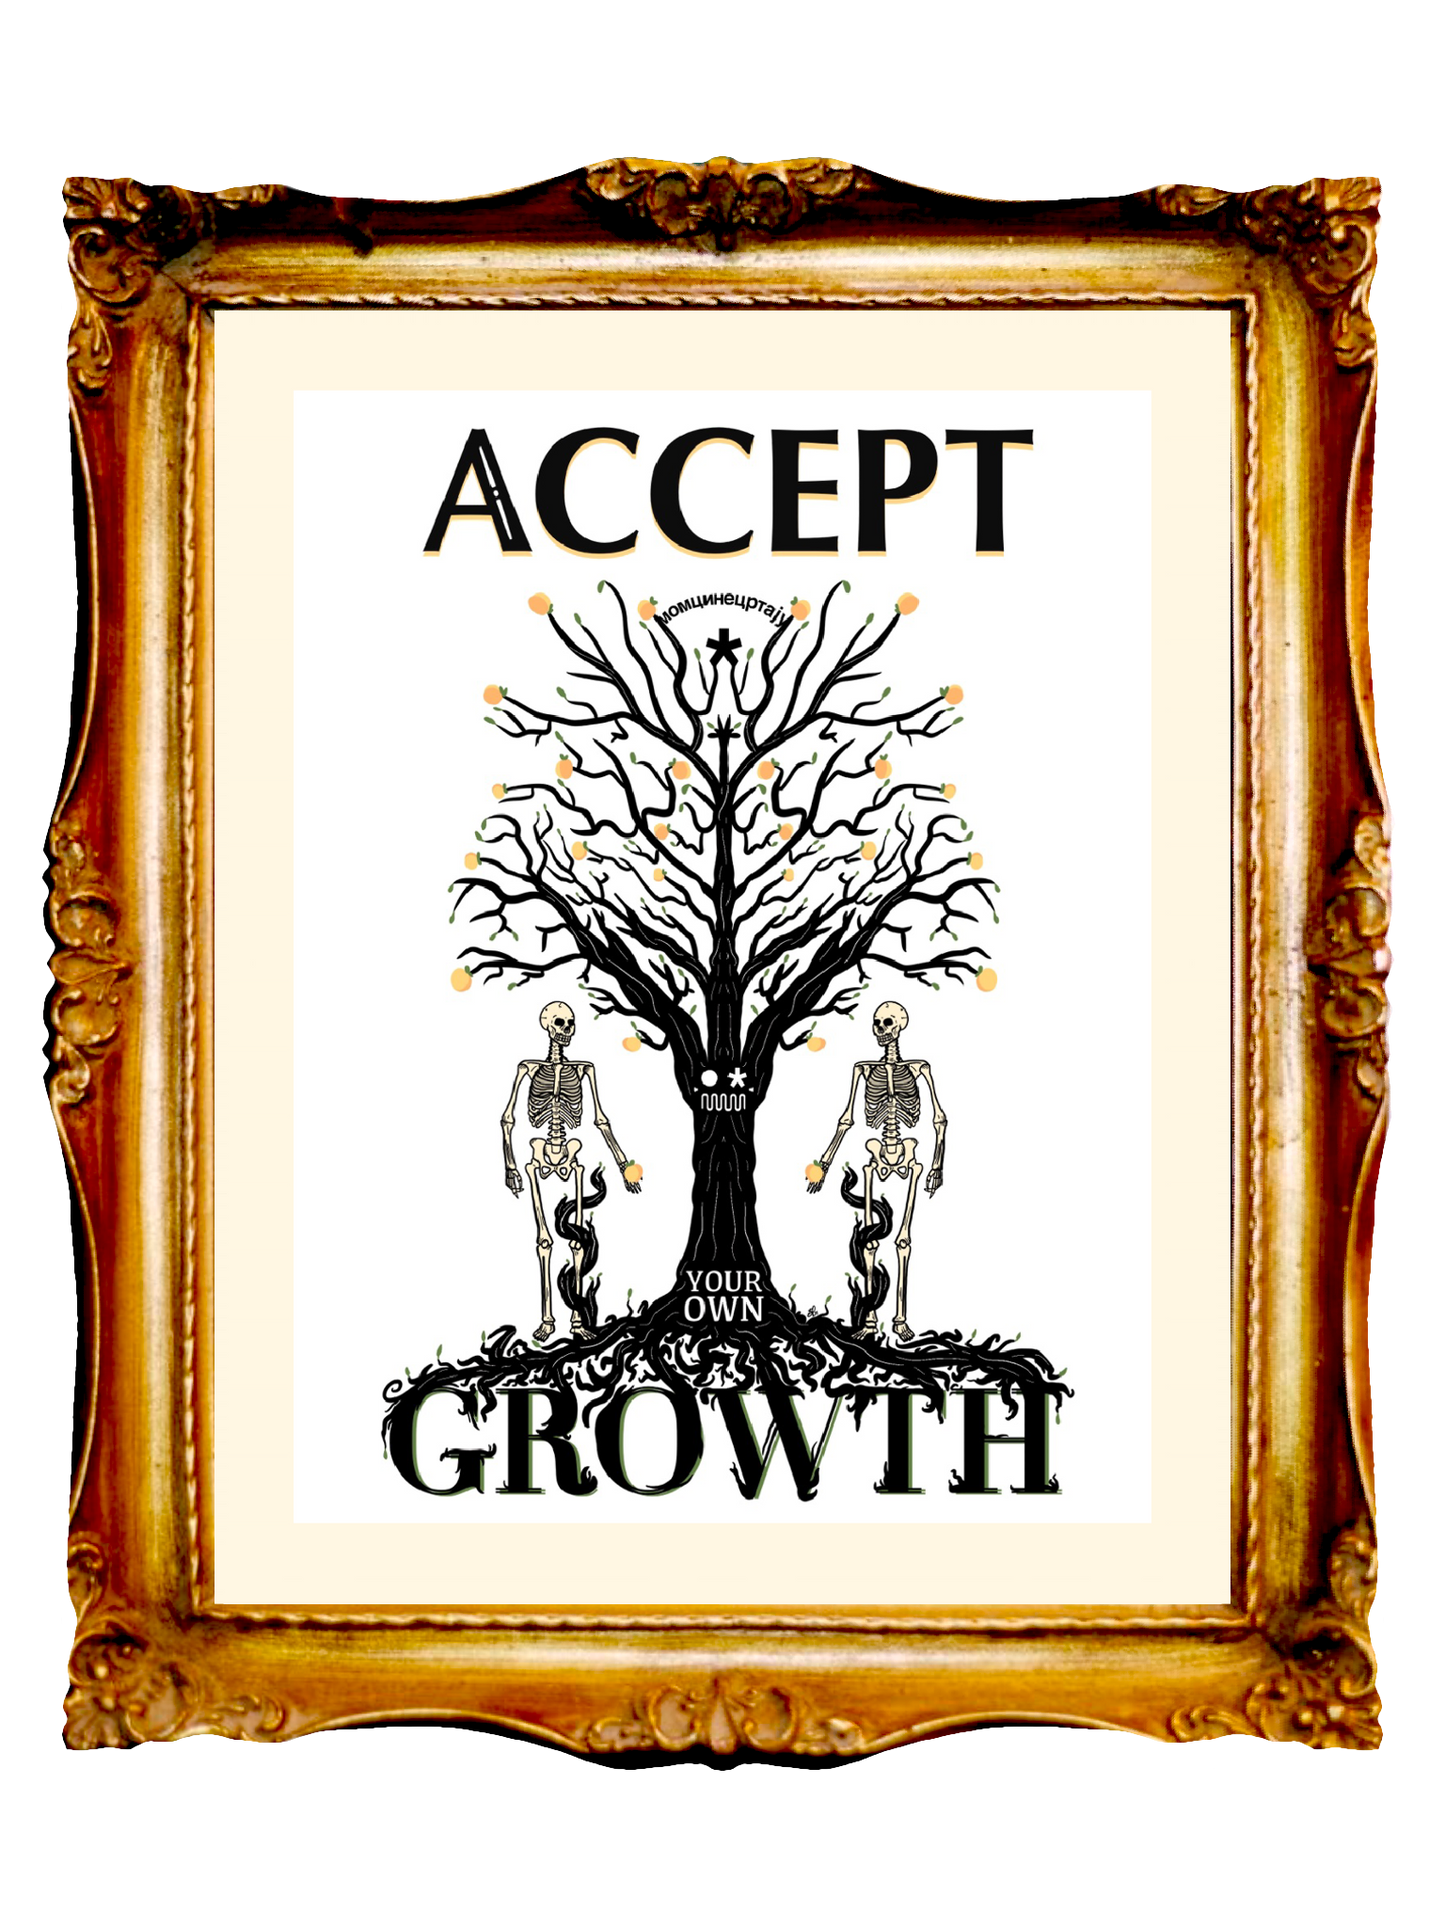 AFFIRMATION - ACCEPT YOUR OWN GROWTH - Limited Poster by BOYSDONTDRAW